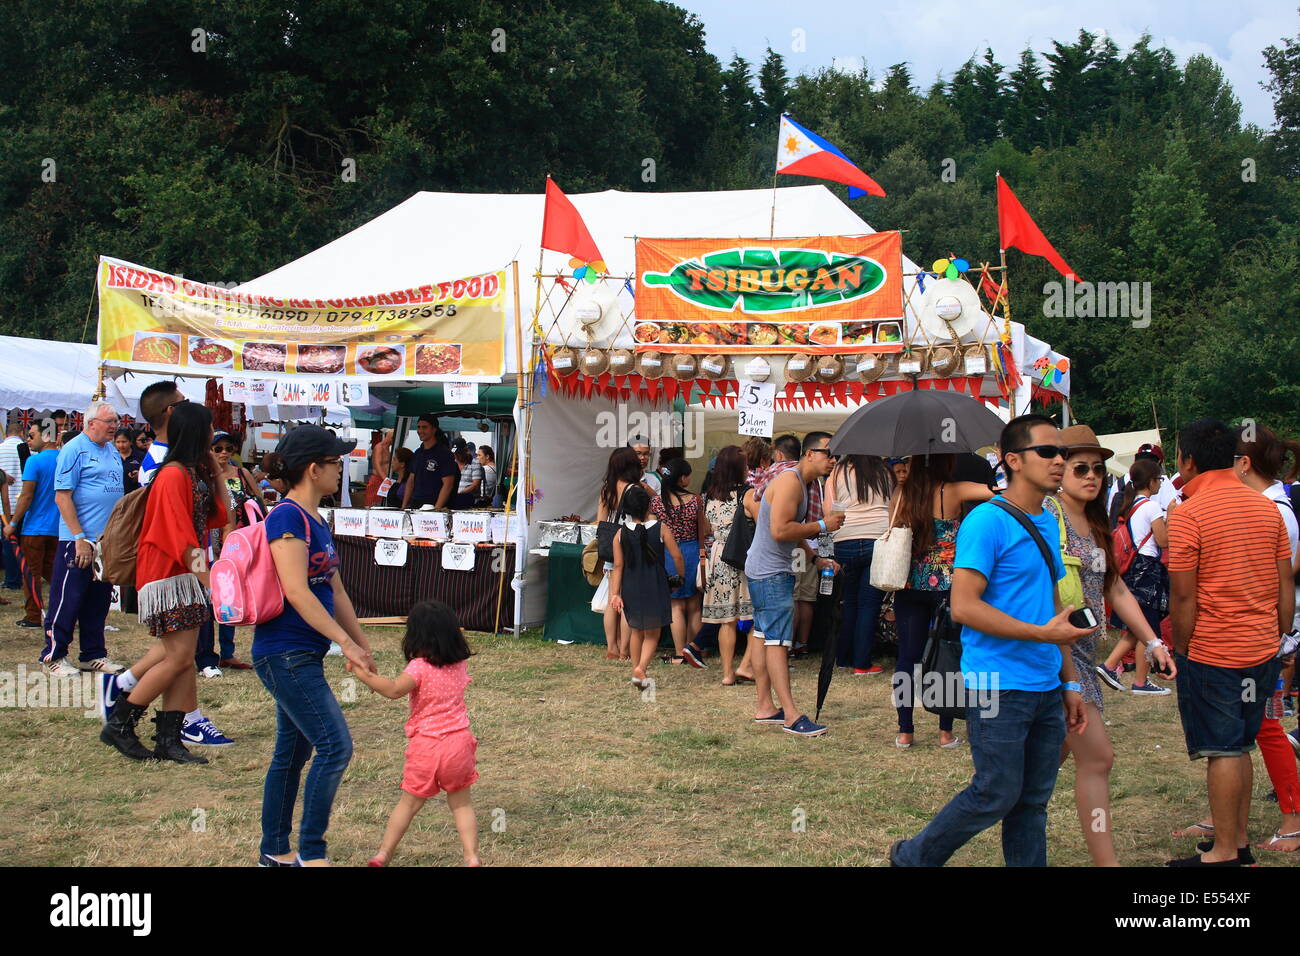 Walton, Surrey, UK. 20th July, 2014. More people queing for philippine food as a must to celebrate the cultural gathering, you must eat when attending a fiesta it is derisory not to. Here you can see British and Filipino's mingling together in celebration. Credit:  Paul Hamilton/Alamy Live News Stock Photo